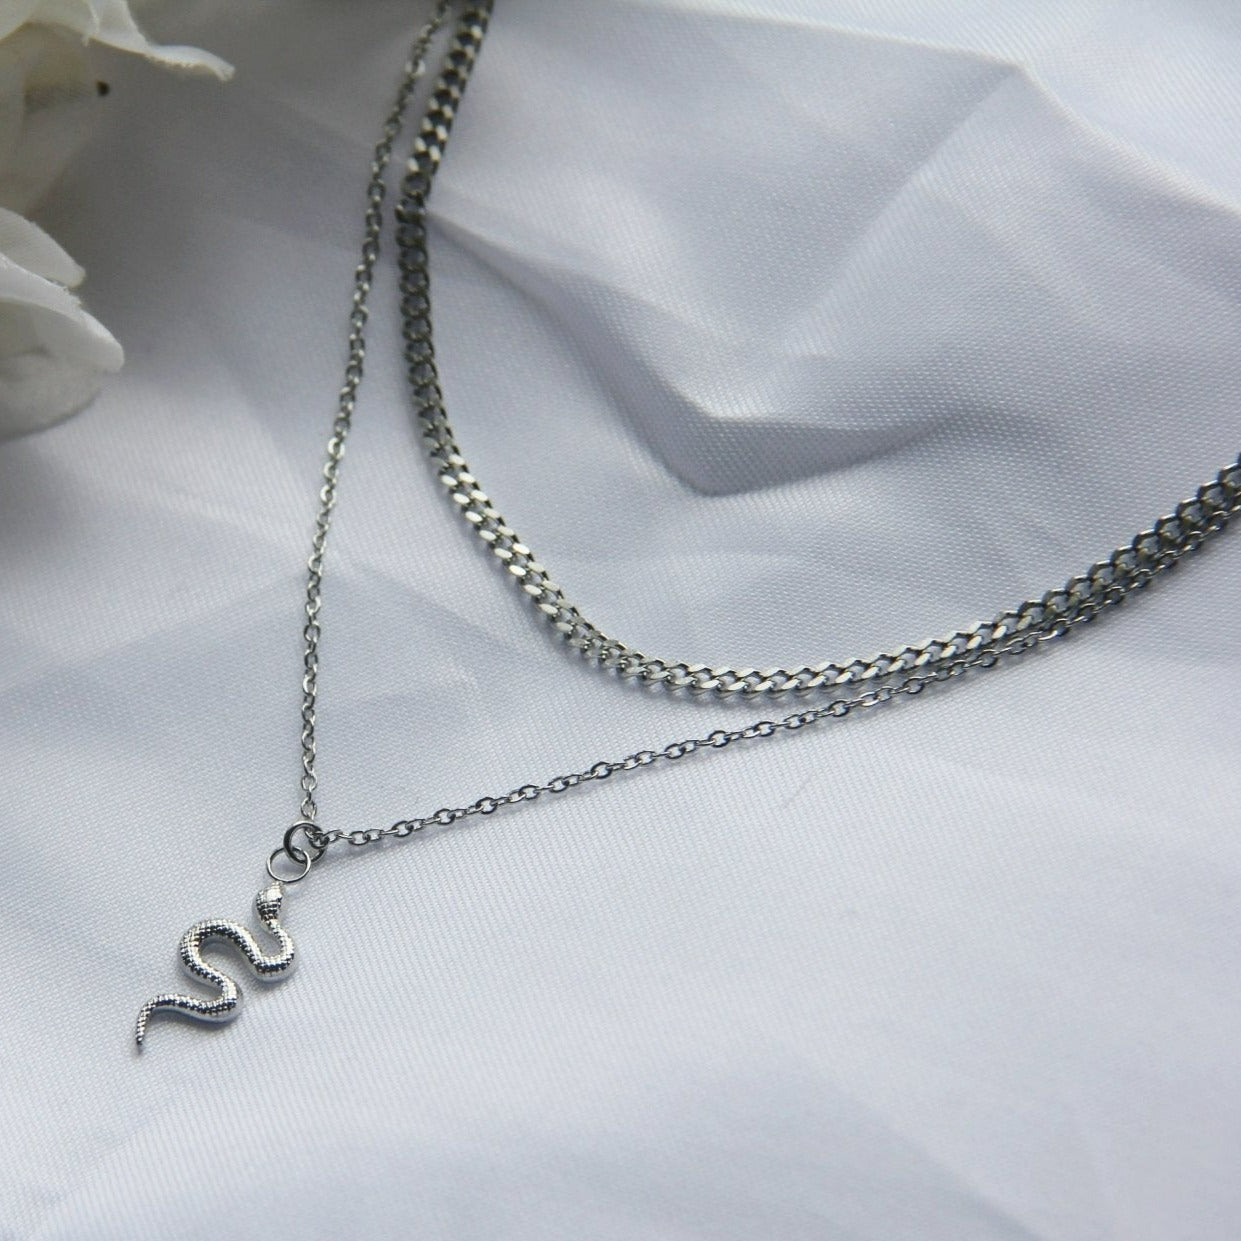 Dainty Silver Necklace Set For Women - Snake Pendant Necklace & 3mm Curb Chain - Necklace - Boutique Wear RENN